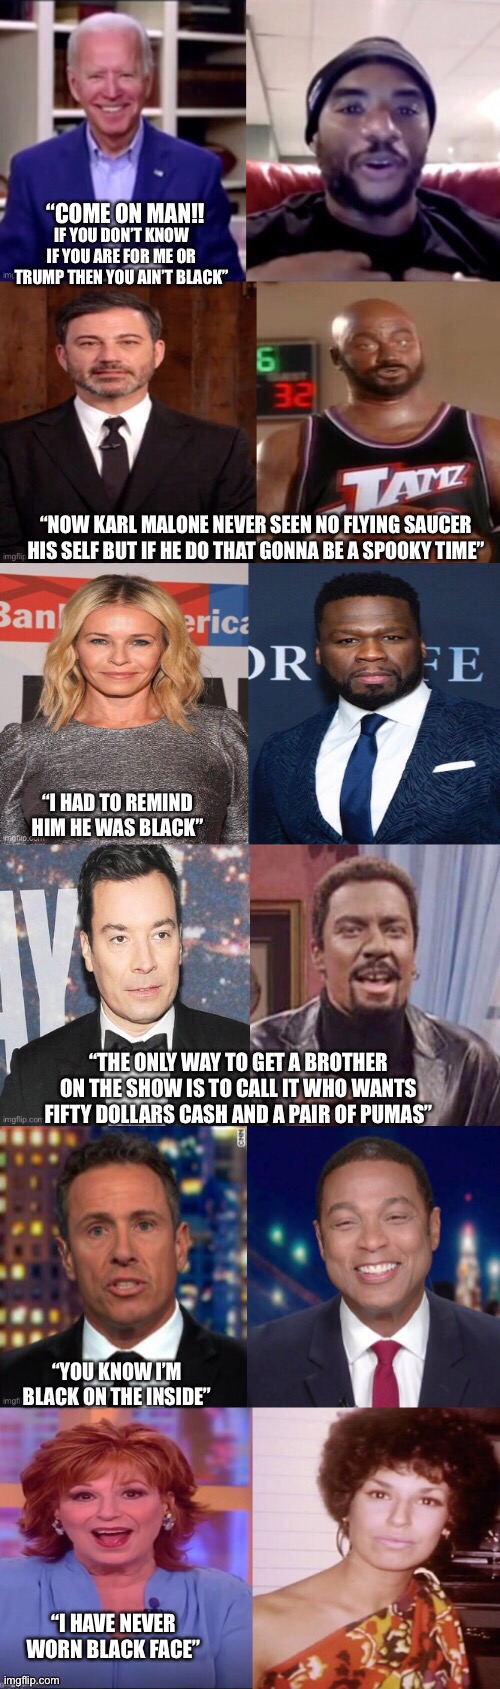 But don’t they stand against racism??? | image tagged in liberal logic,stupid liberals,liberal hypocrisy,2021,politics,political | made w/ Imgflip meme maker